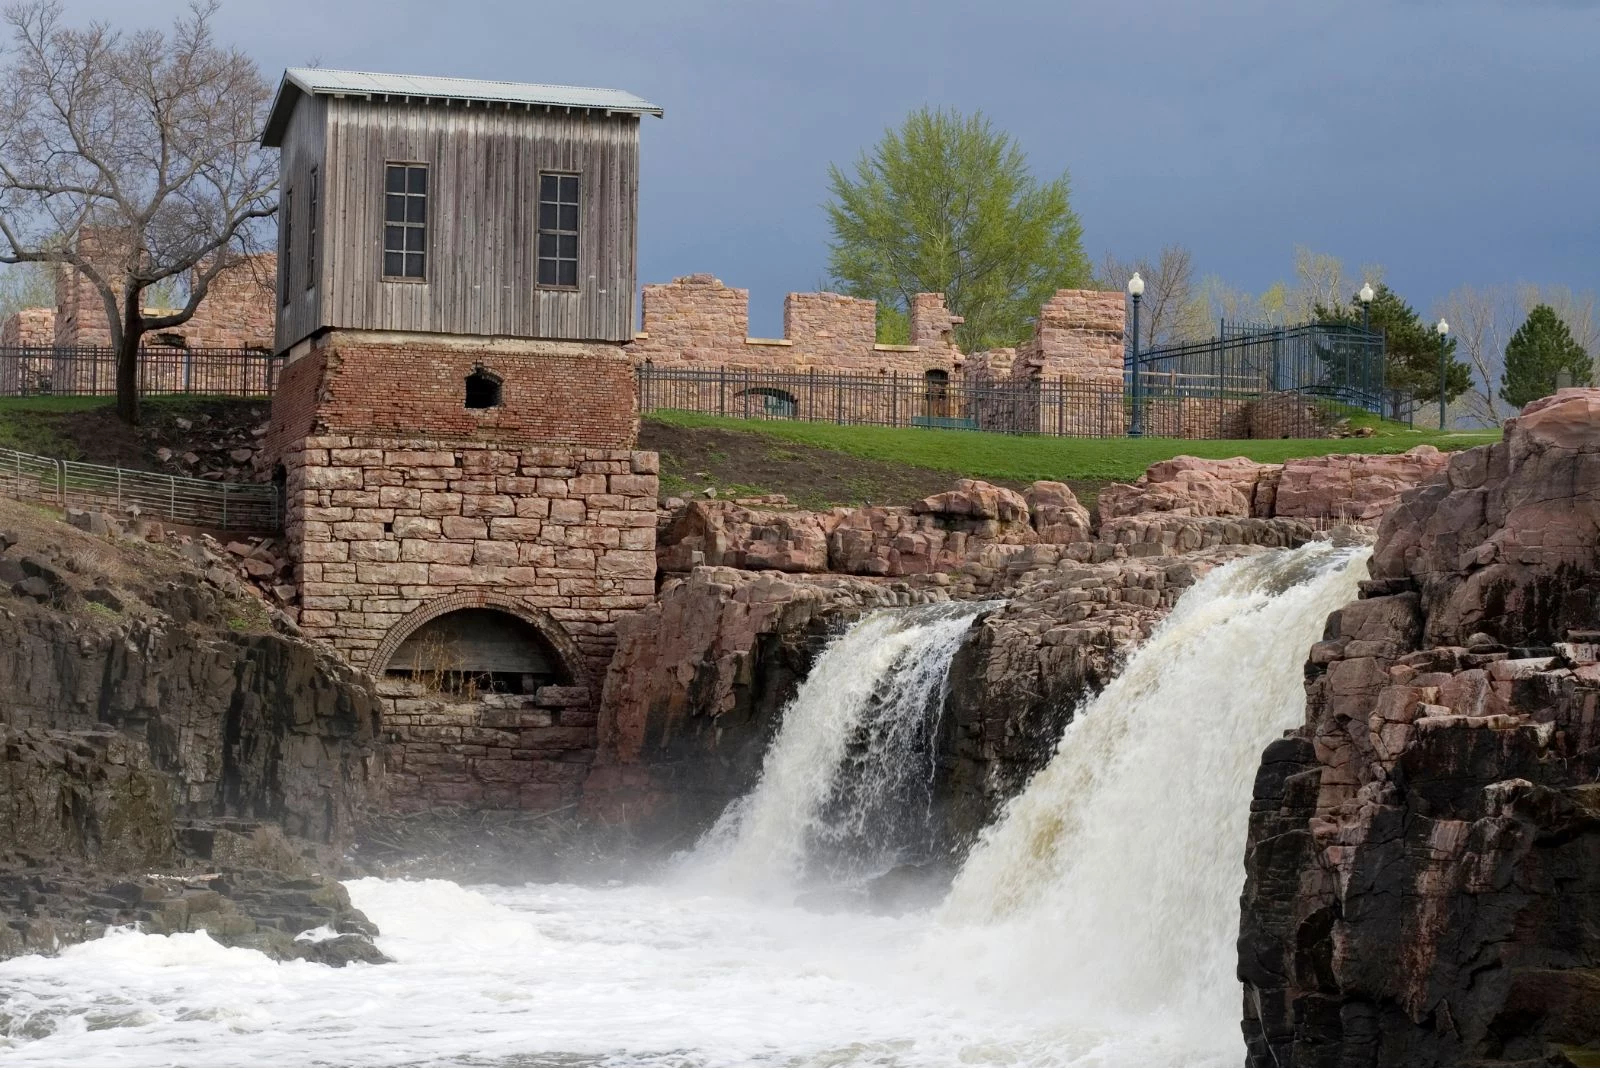 Falls on the Big Sioux River at Sioux Falls